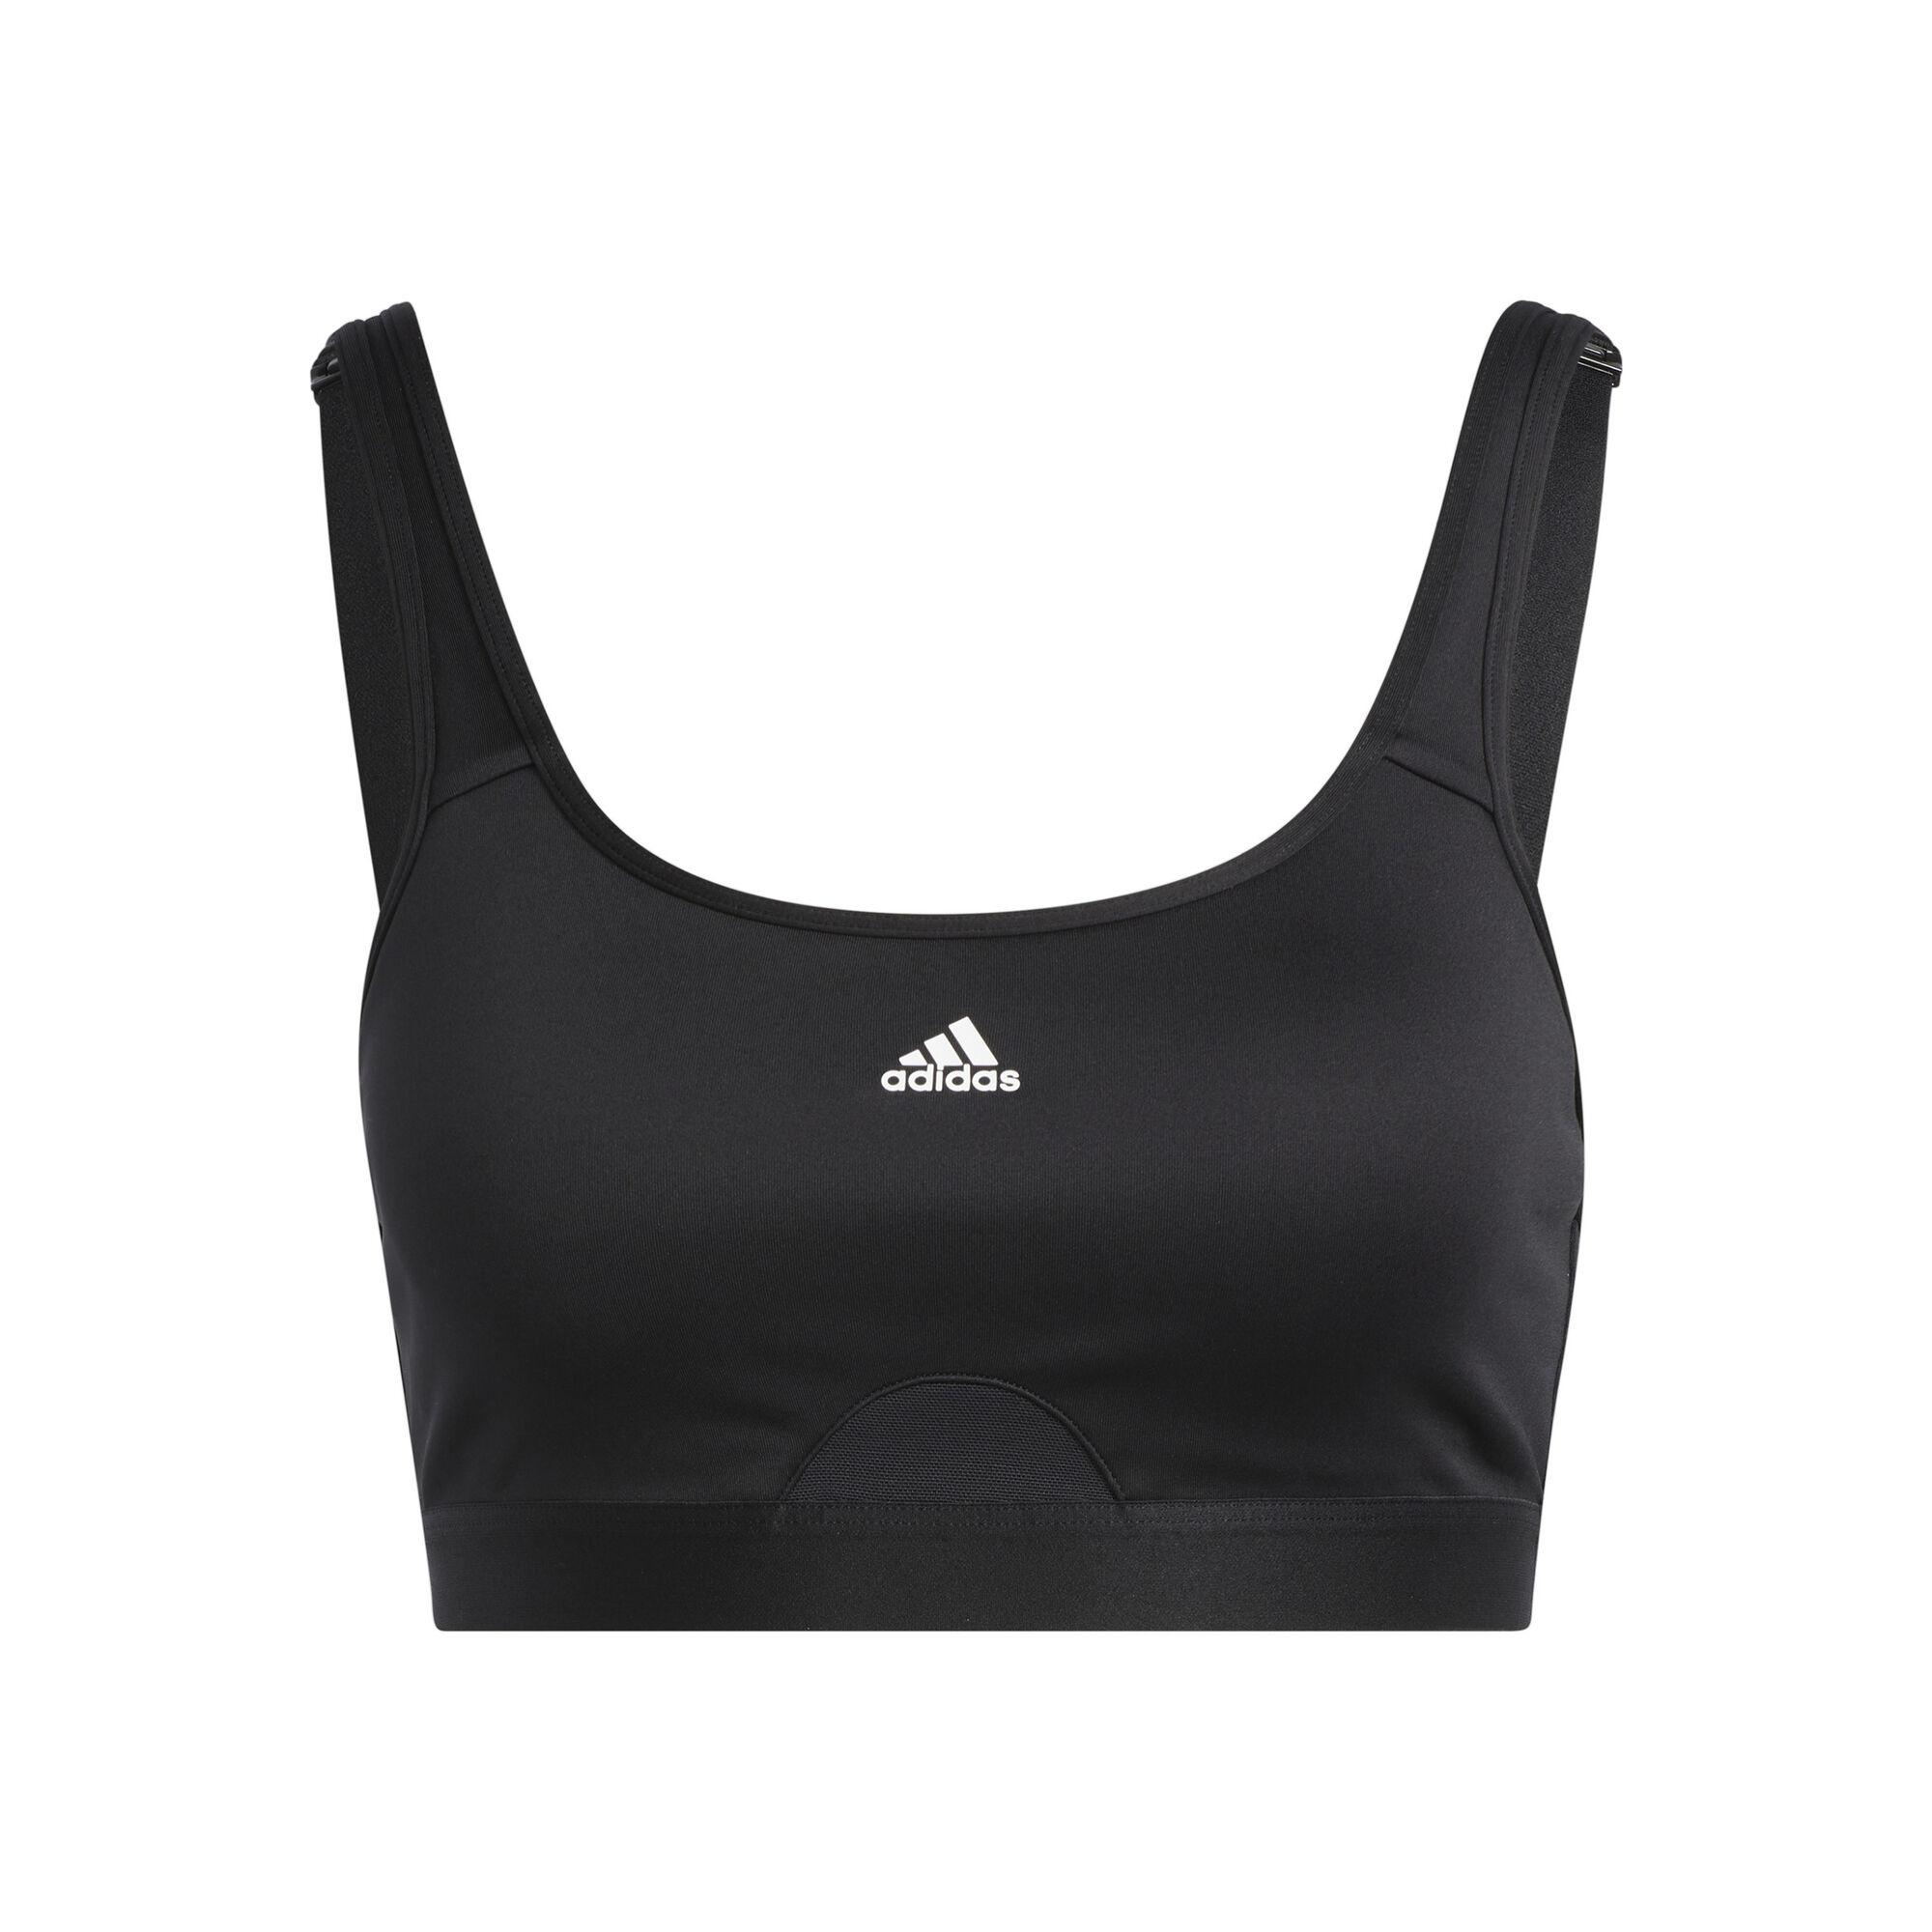 Buy adidas TLRD Move High-Support Sports Bras Women Black online